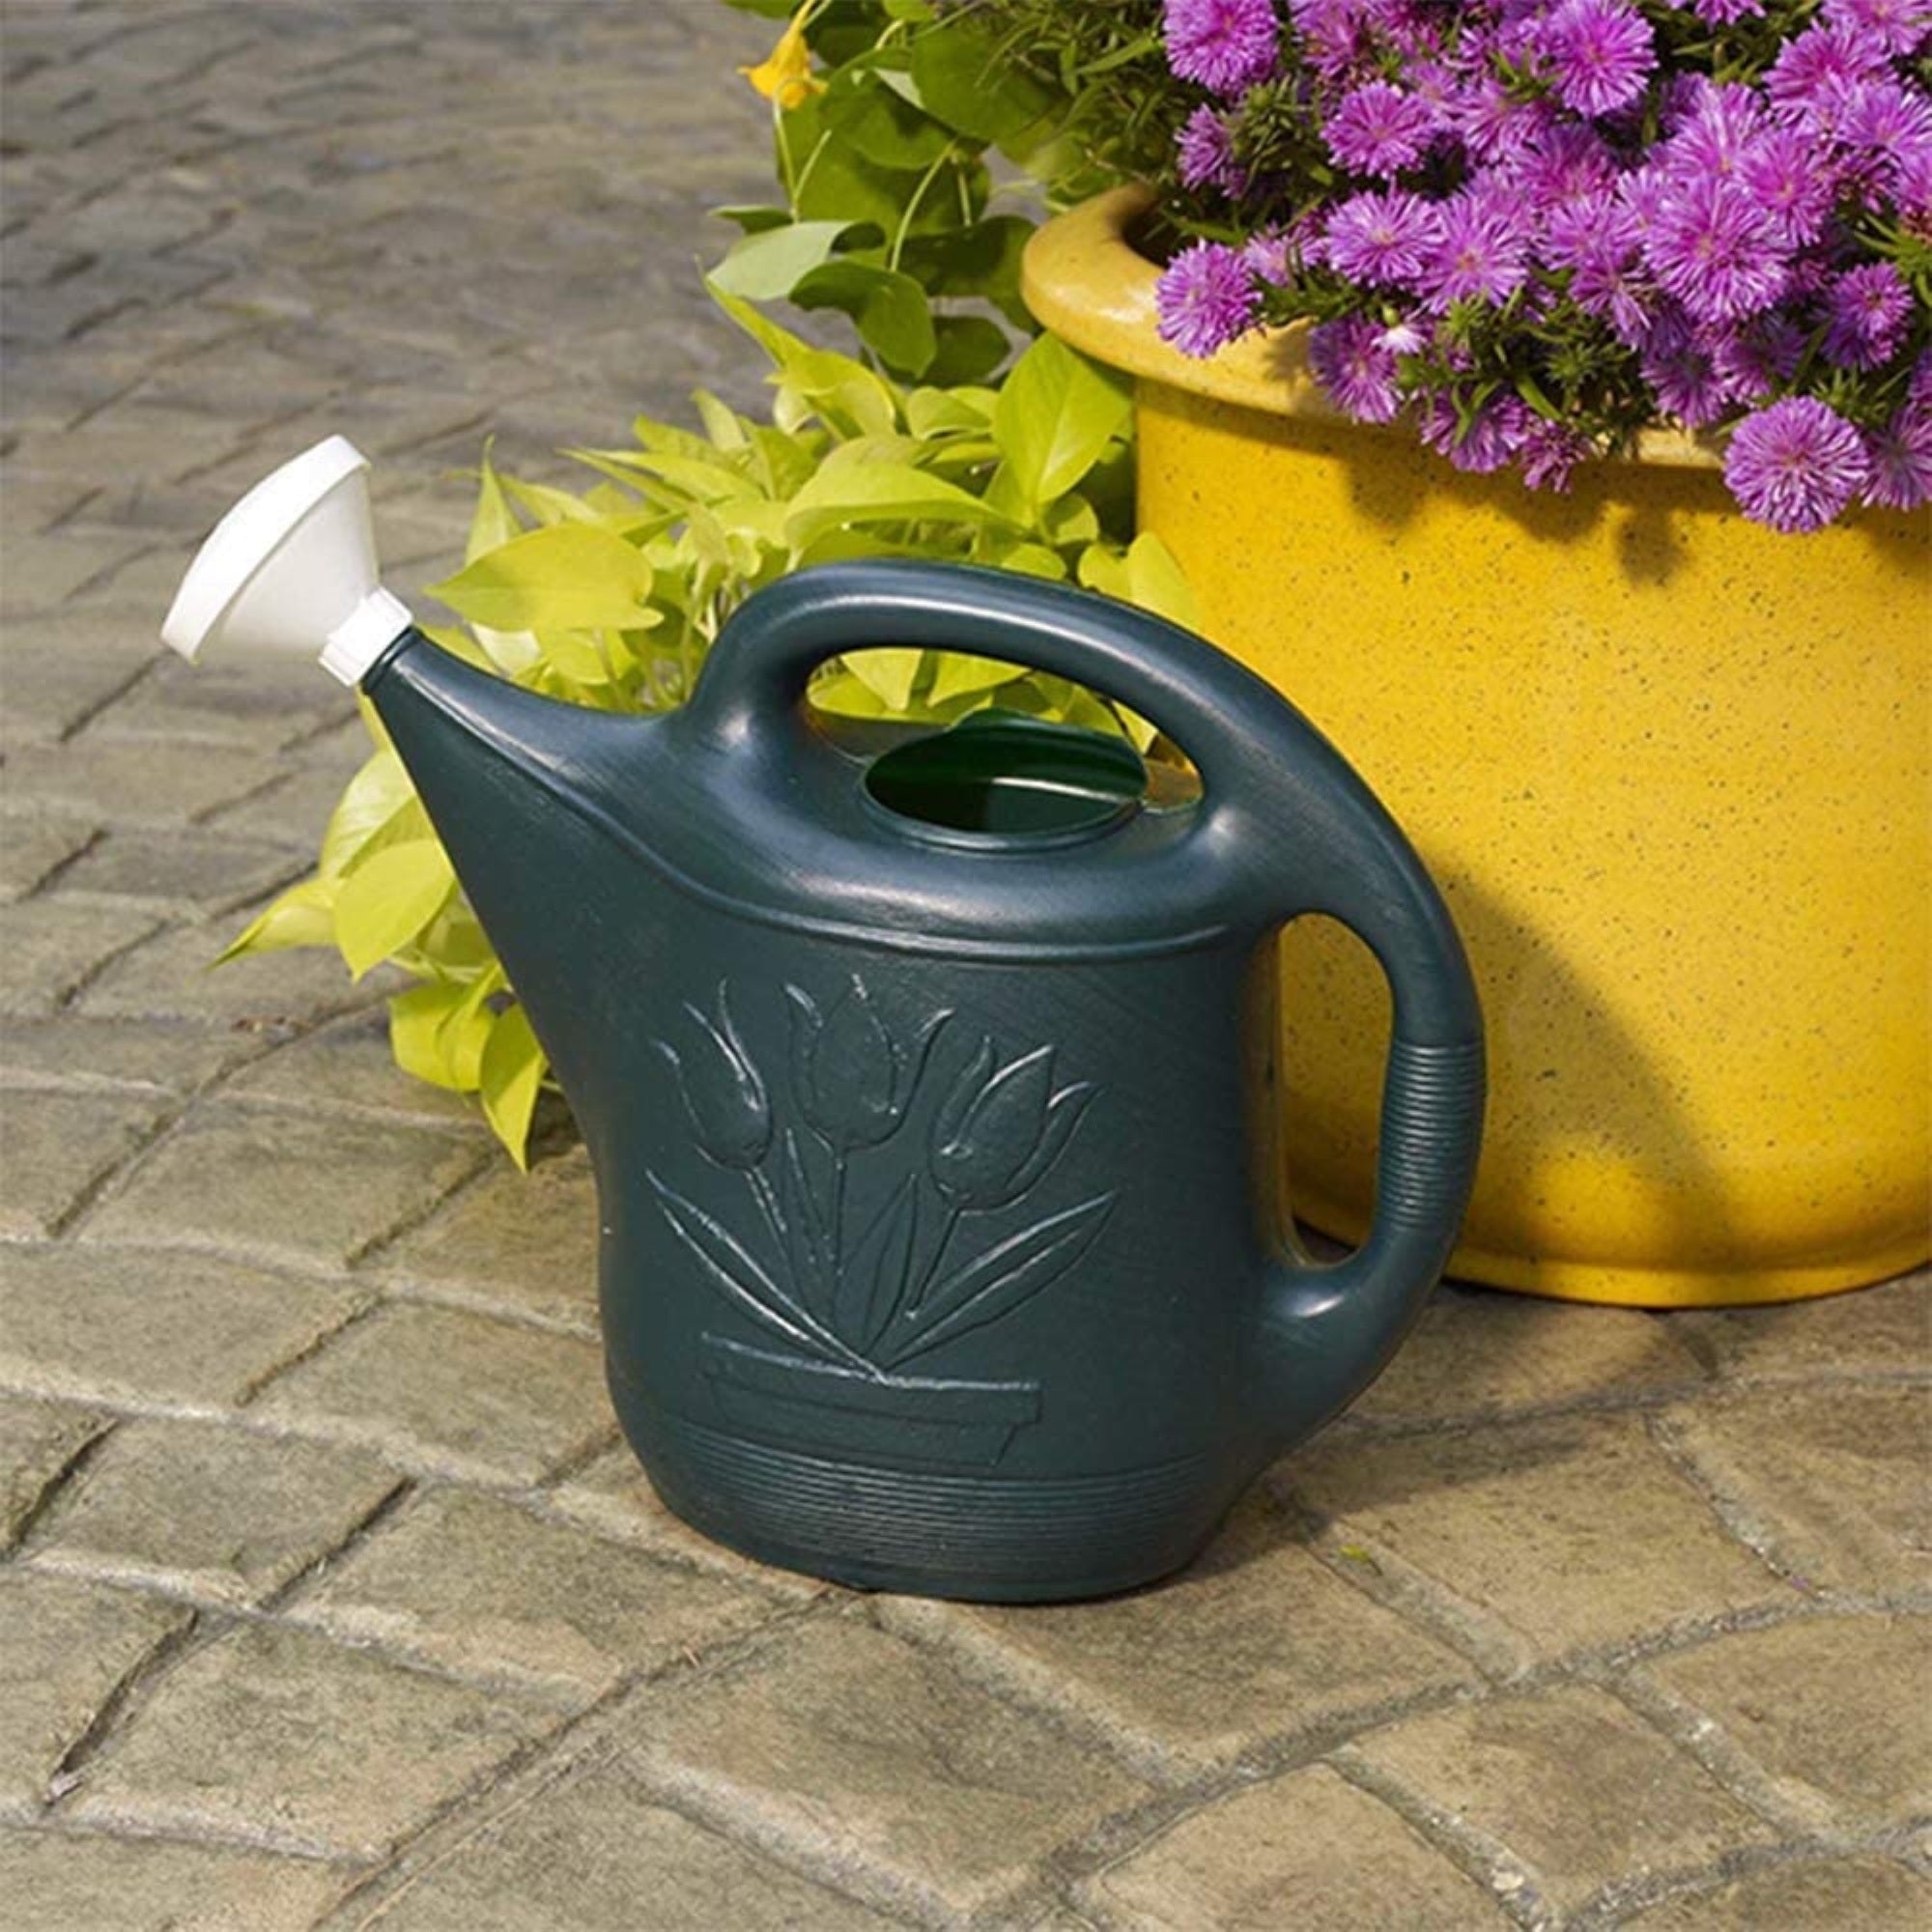 Novelty Classic Plastic Watering Can, Classic Version, Green, 2 Gallon Capacity